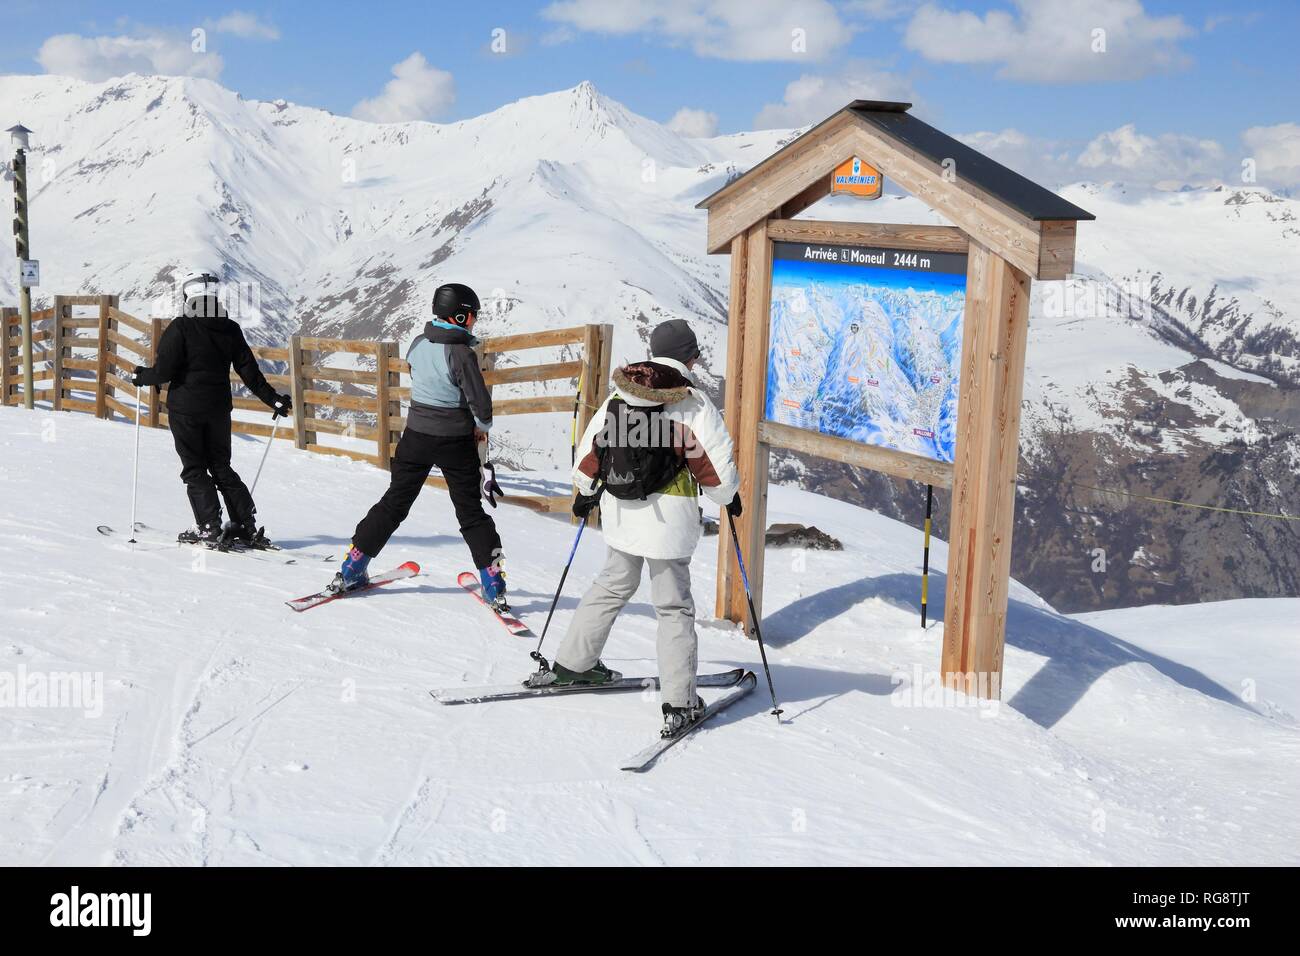 VALLOIRE, FRANCE - MARCH 24, 2015: Skier analyzes ski map in Galibier-Thabor station in France. The station is located in Valmeinier and Valloire and  Stock Photo